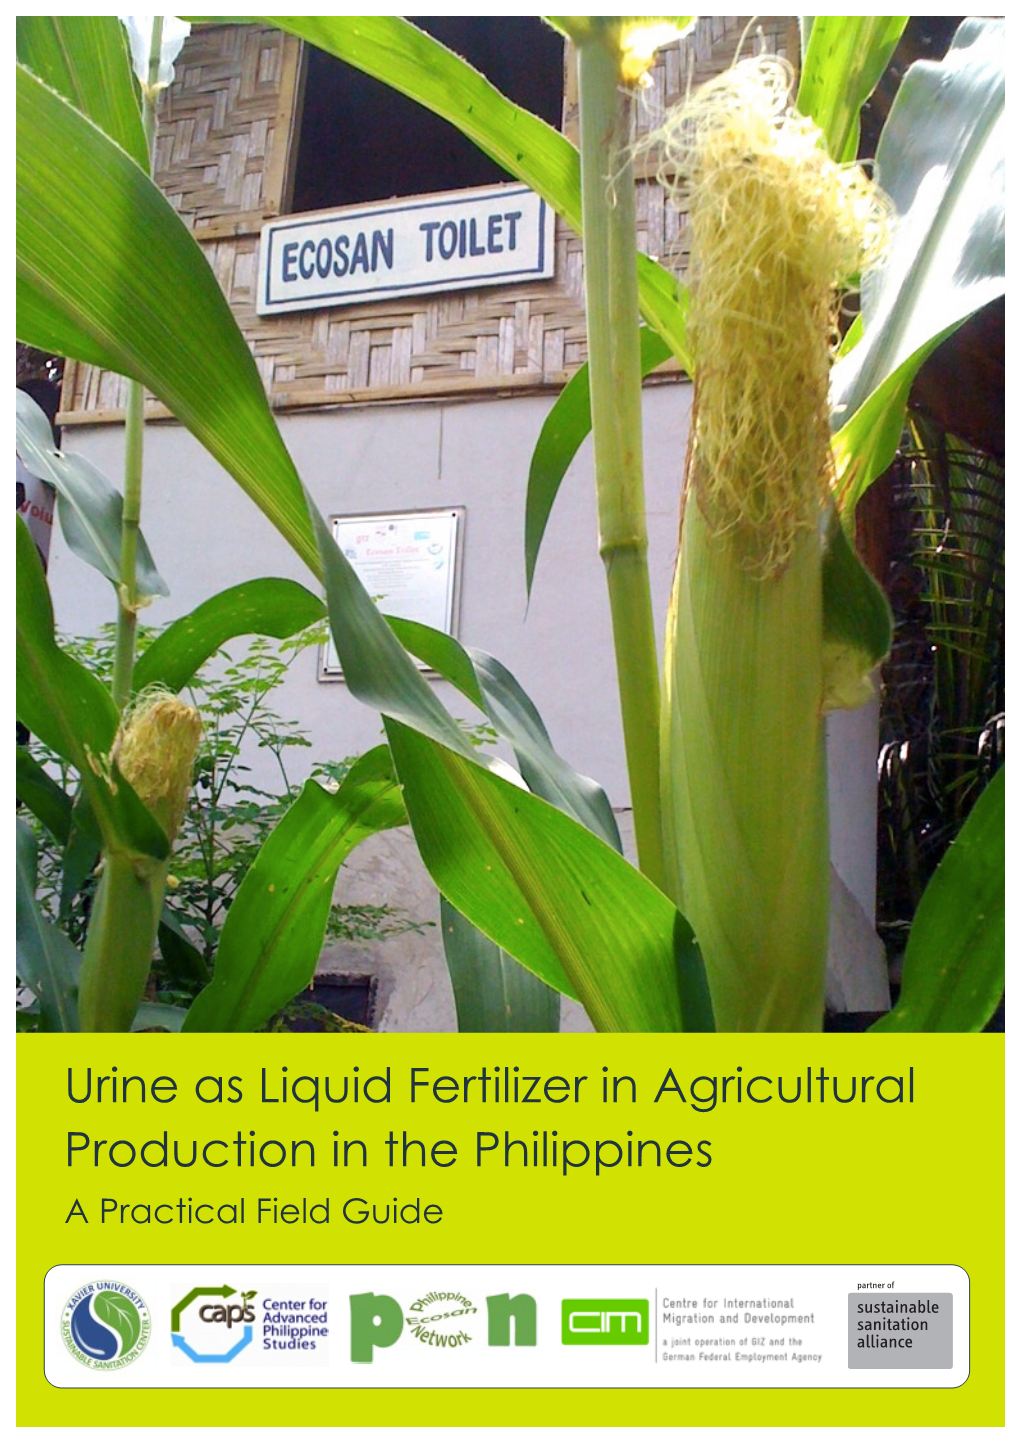 Urine As Liquid Fertilizer in Agricultural Production in The